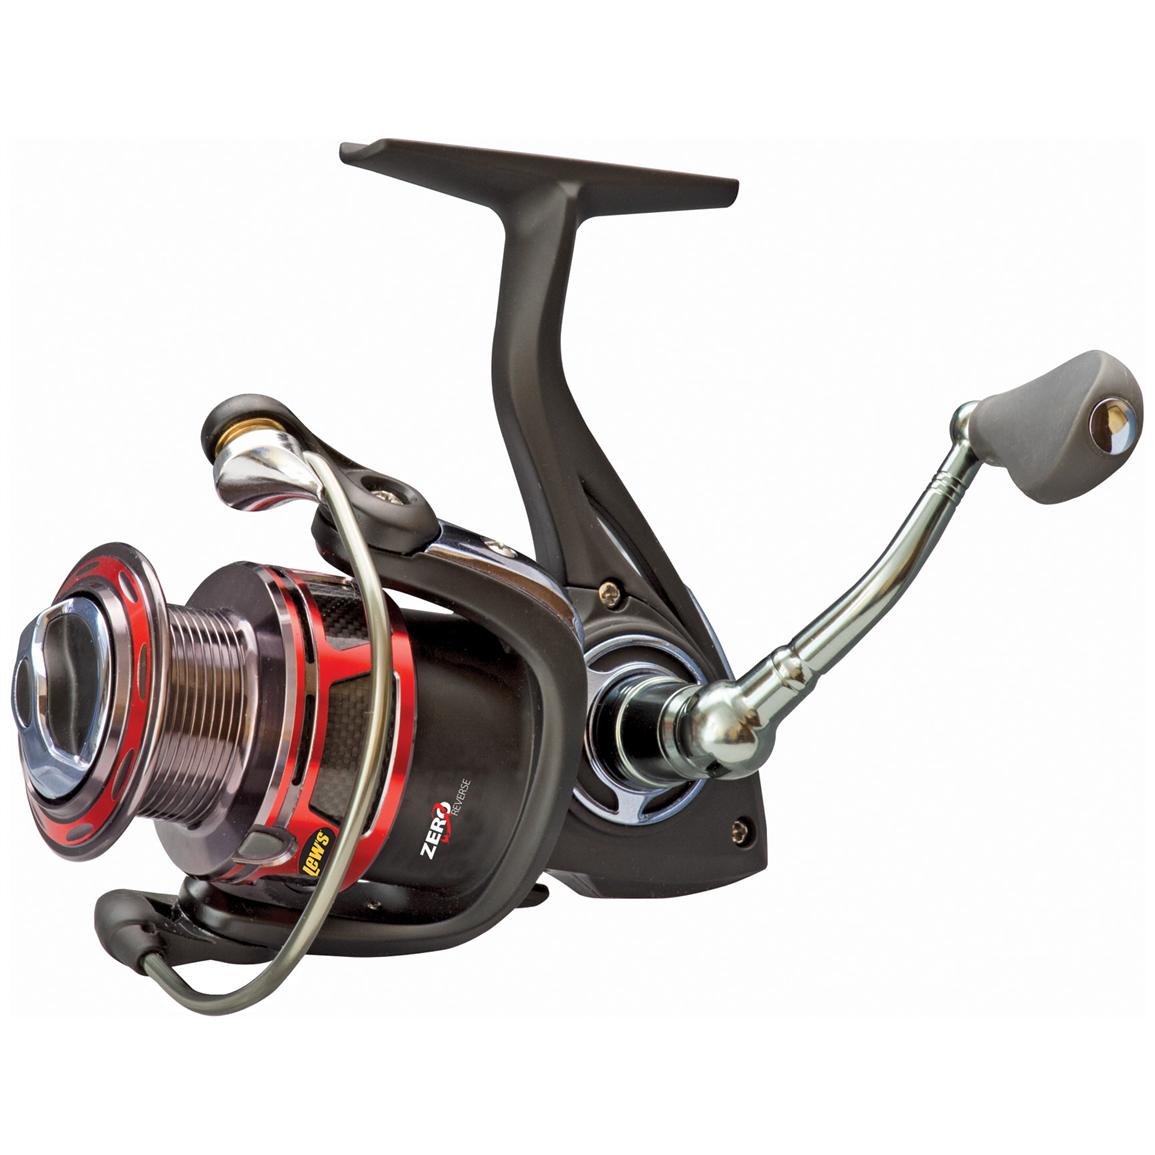 lew-s-hs-speed-spin-spinning-reel-589503-spinning-reels-at-sportsman